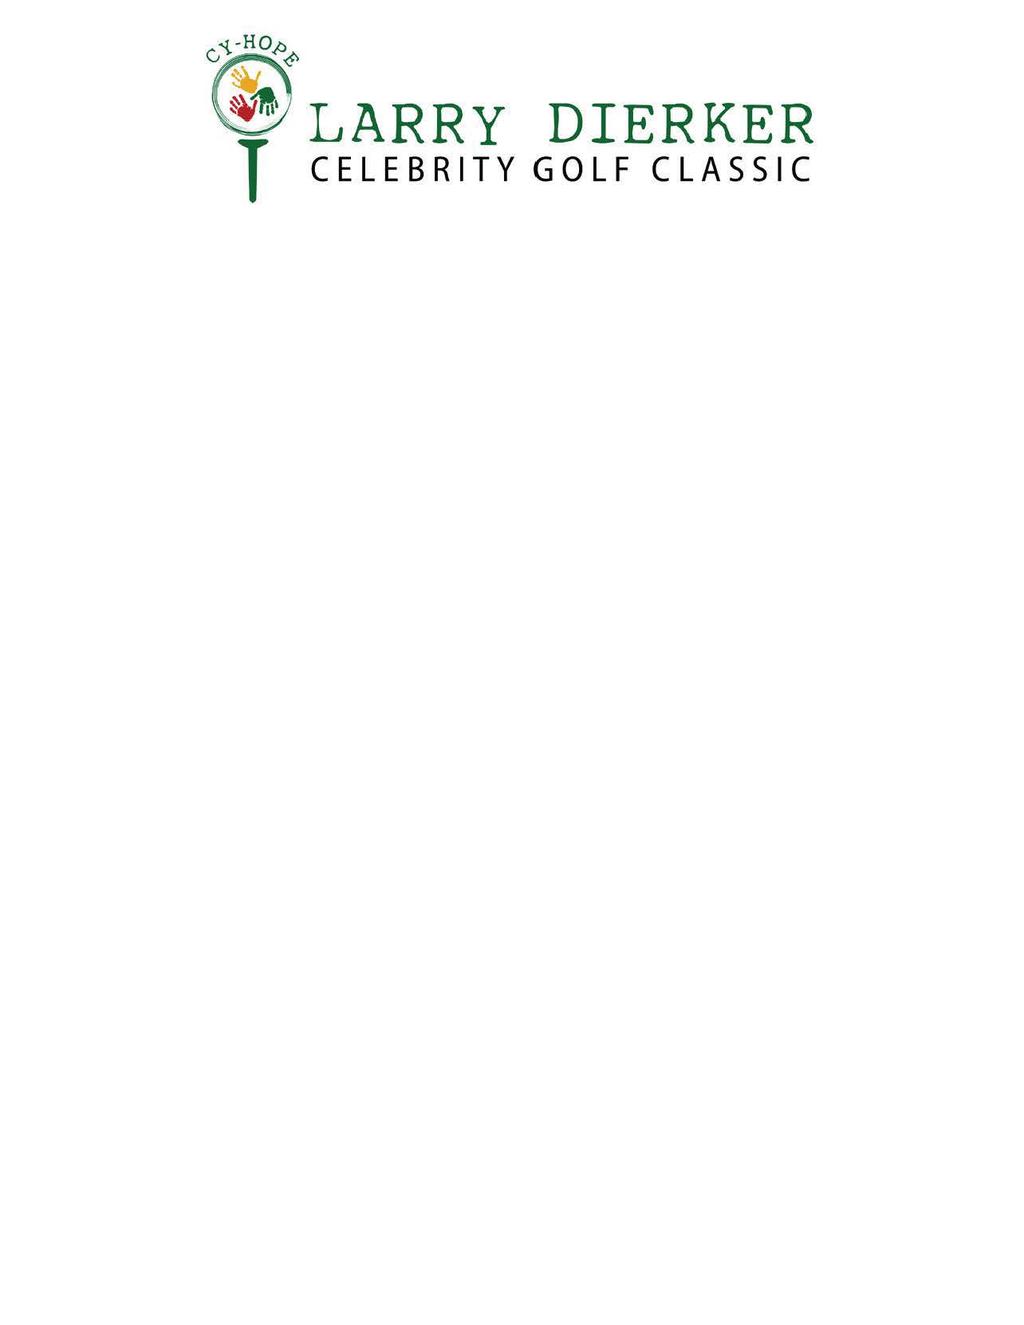 ~ ~ T LARRY DIERKER CELEBRITY GOLF CLASSIC Benefiting Cy-Hope Event Underwriter - $20,000 Exclusive - Only One Available 2 Teams of four golfers + celebrity at BlackHorse Golf Club for the event VIP